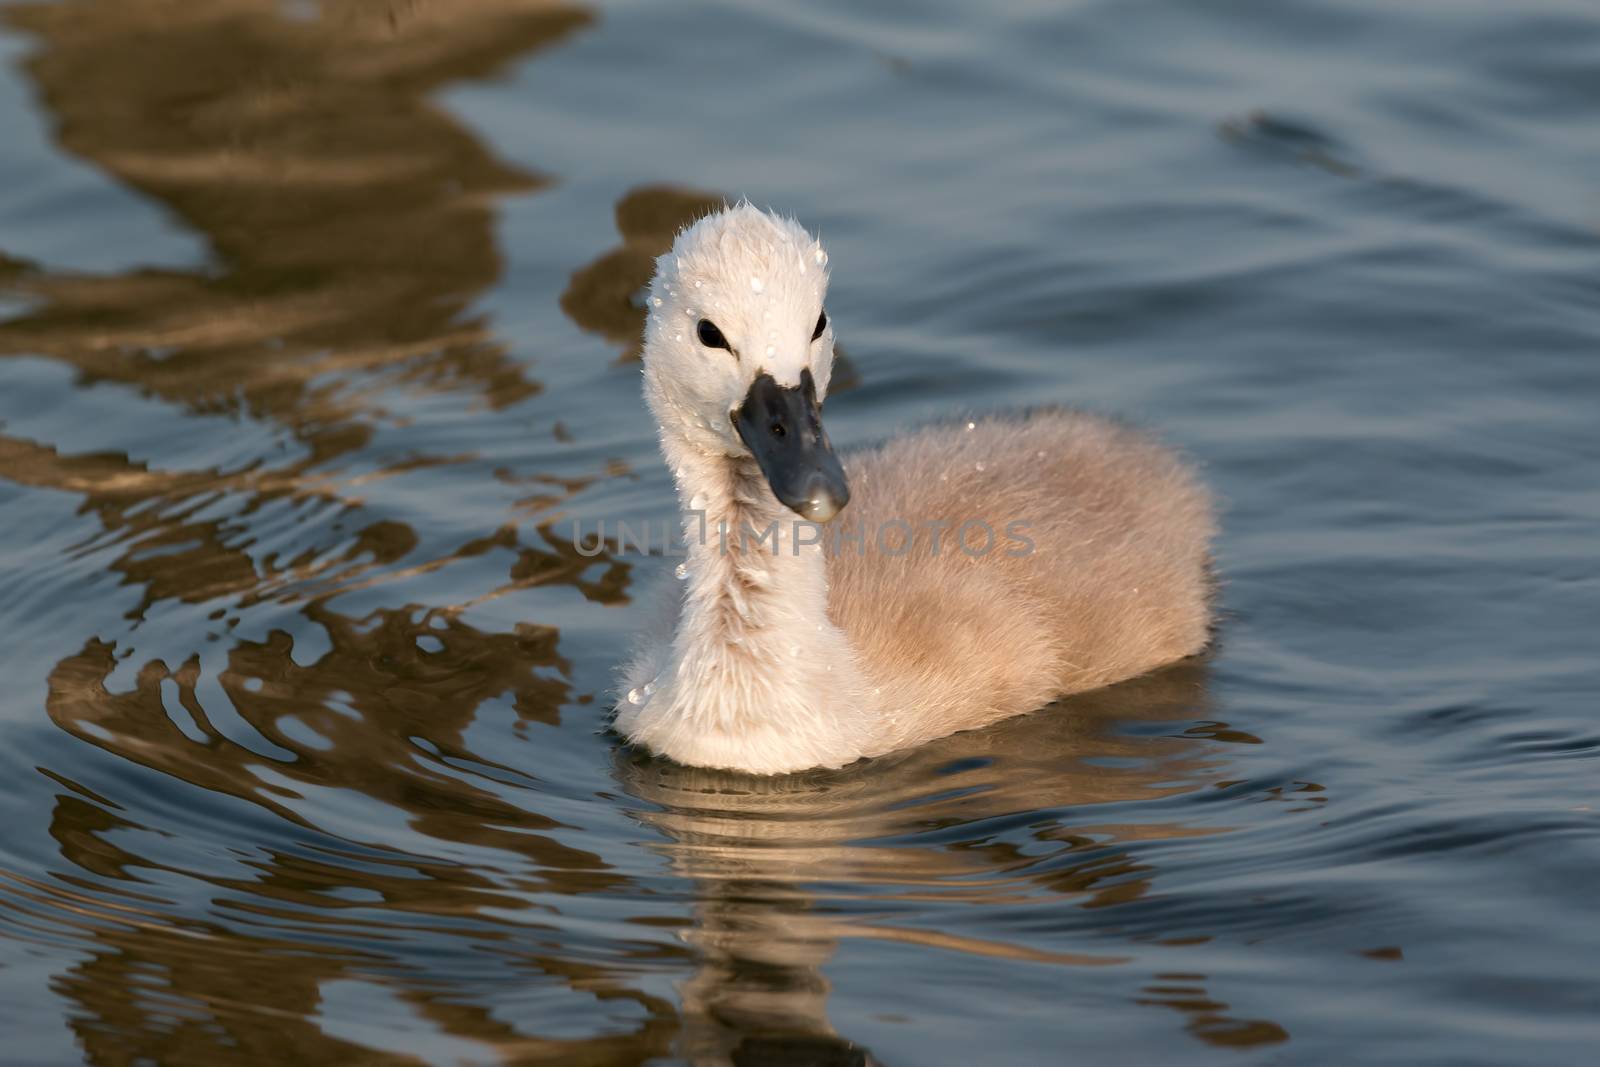 Young swan by Digoarpi